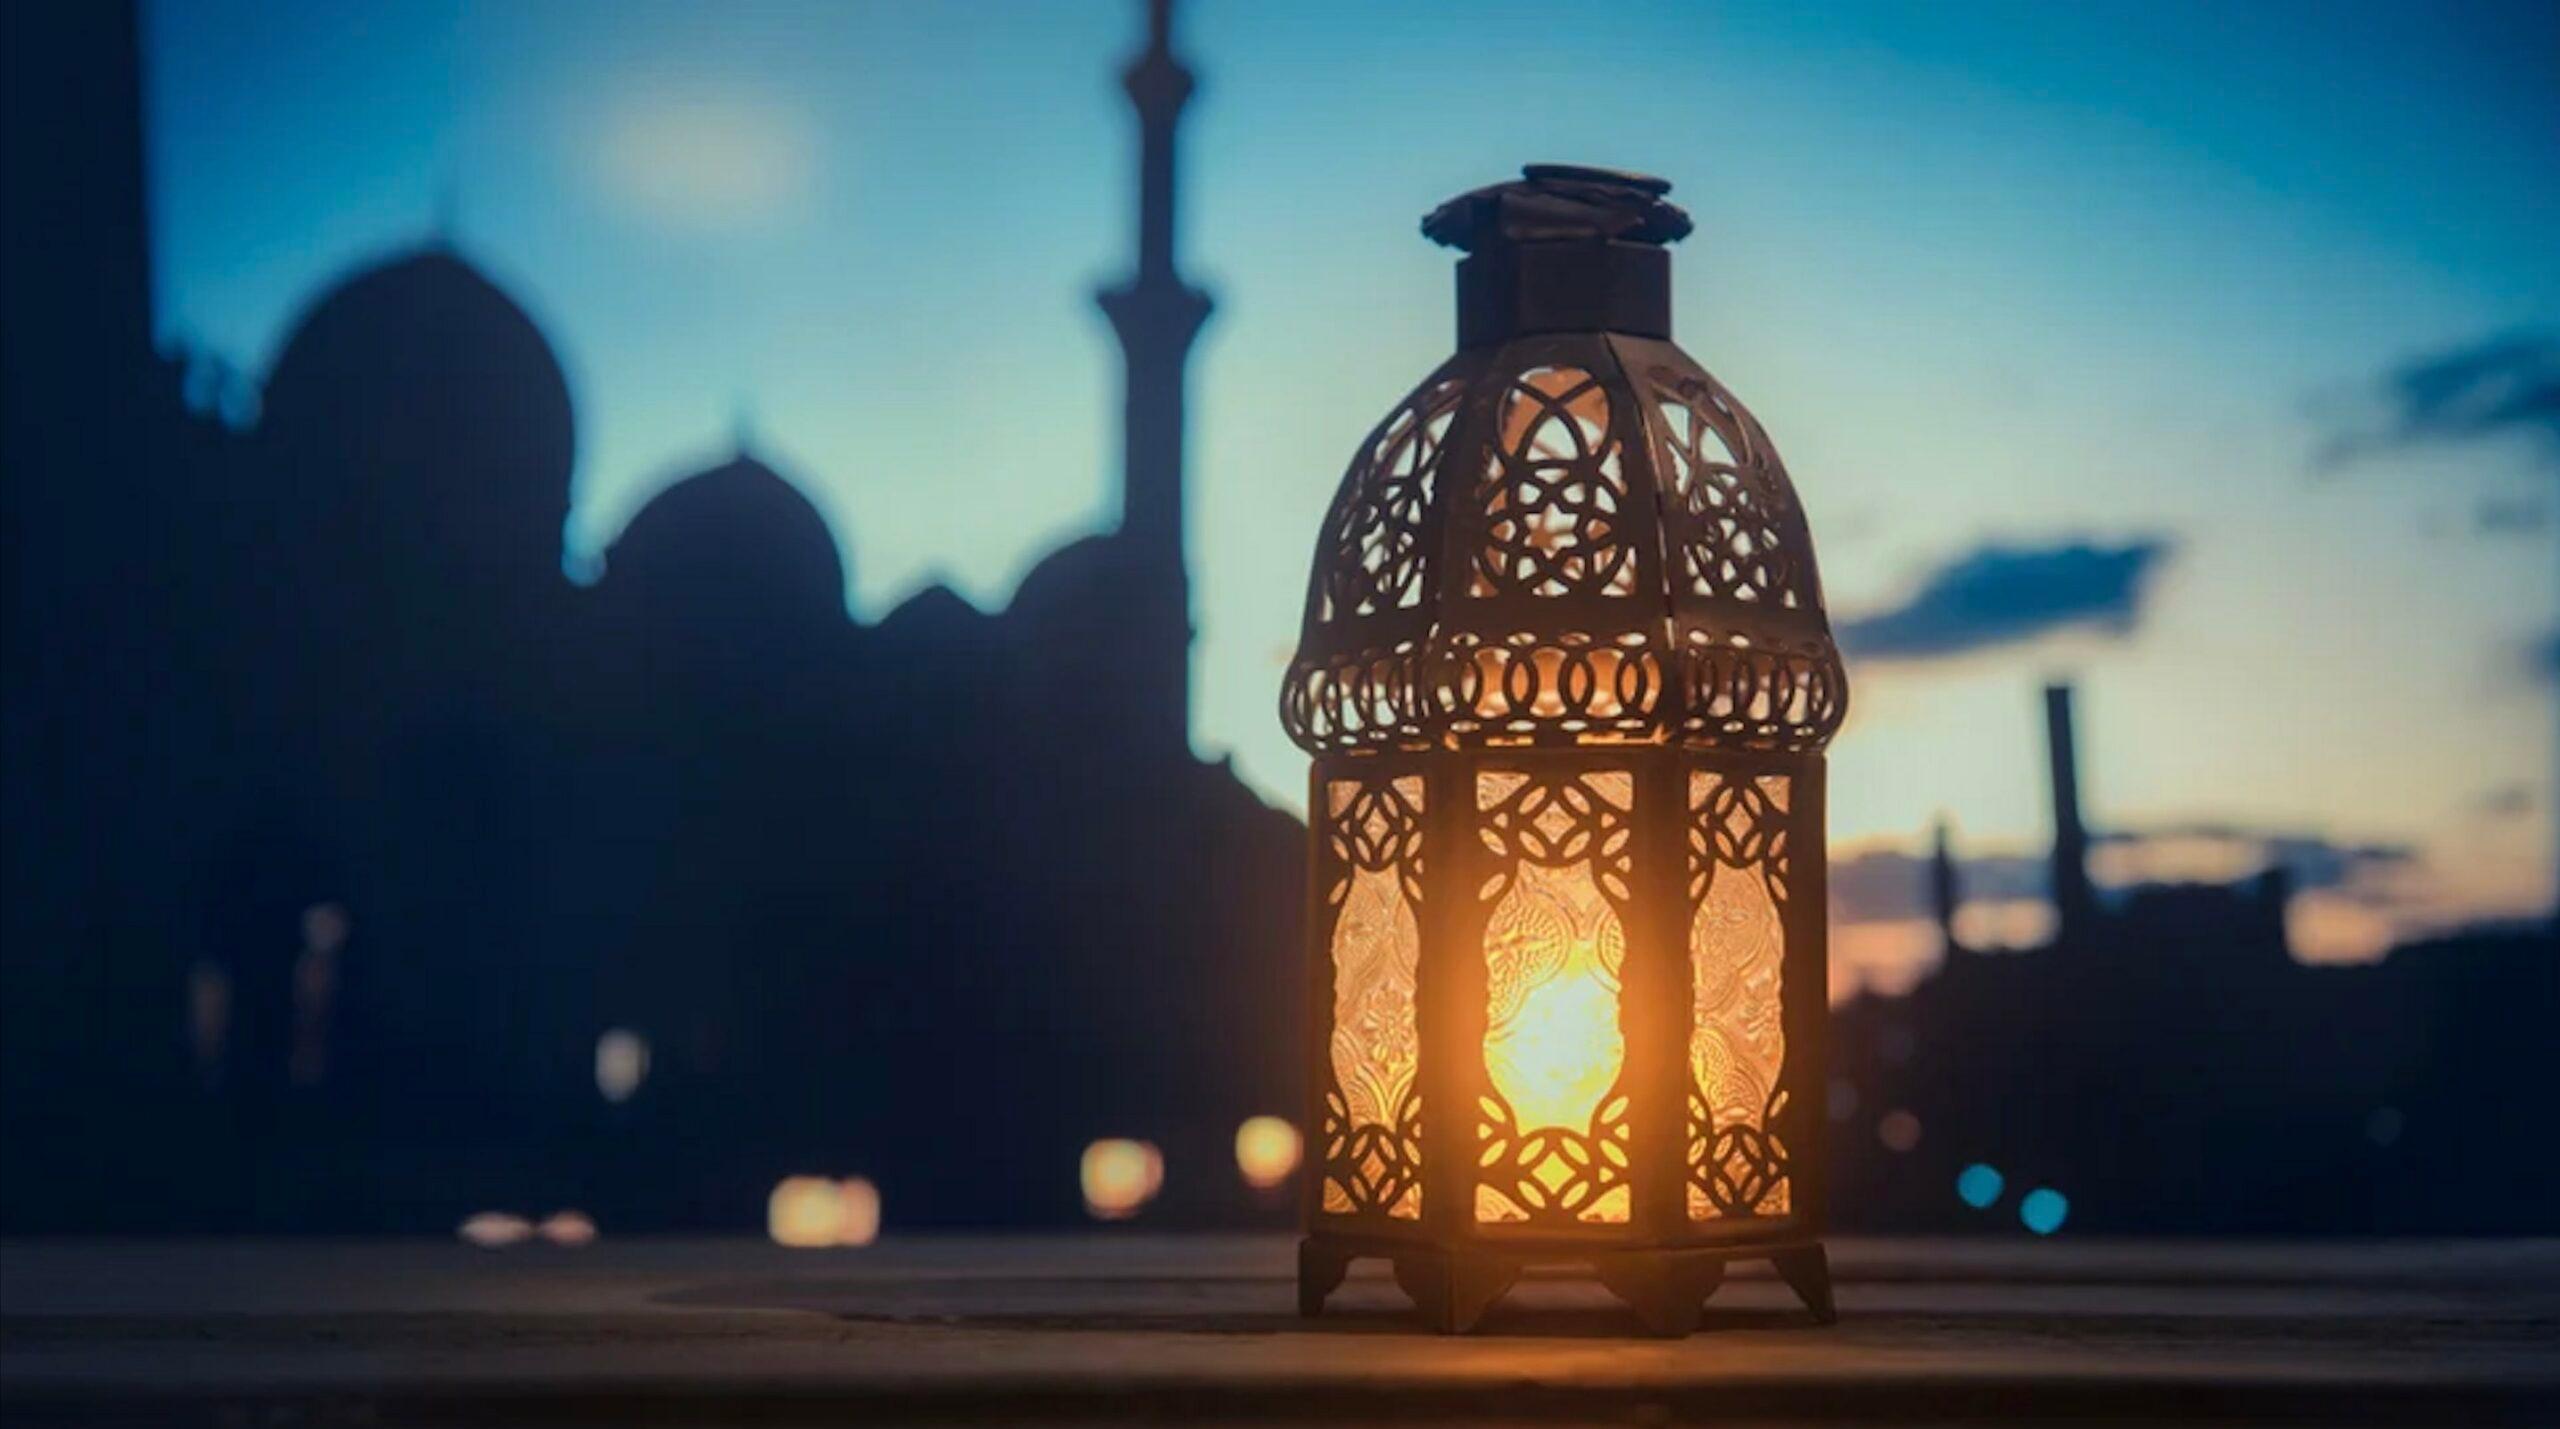 Ramadan will start on 11 March in KSA and the UAE